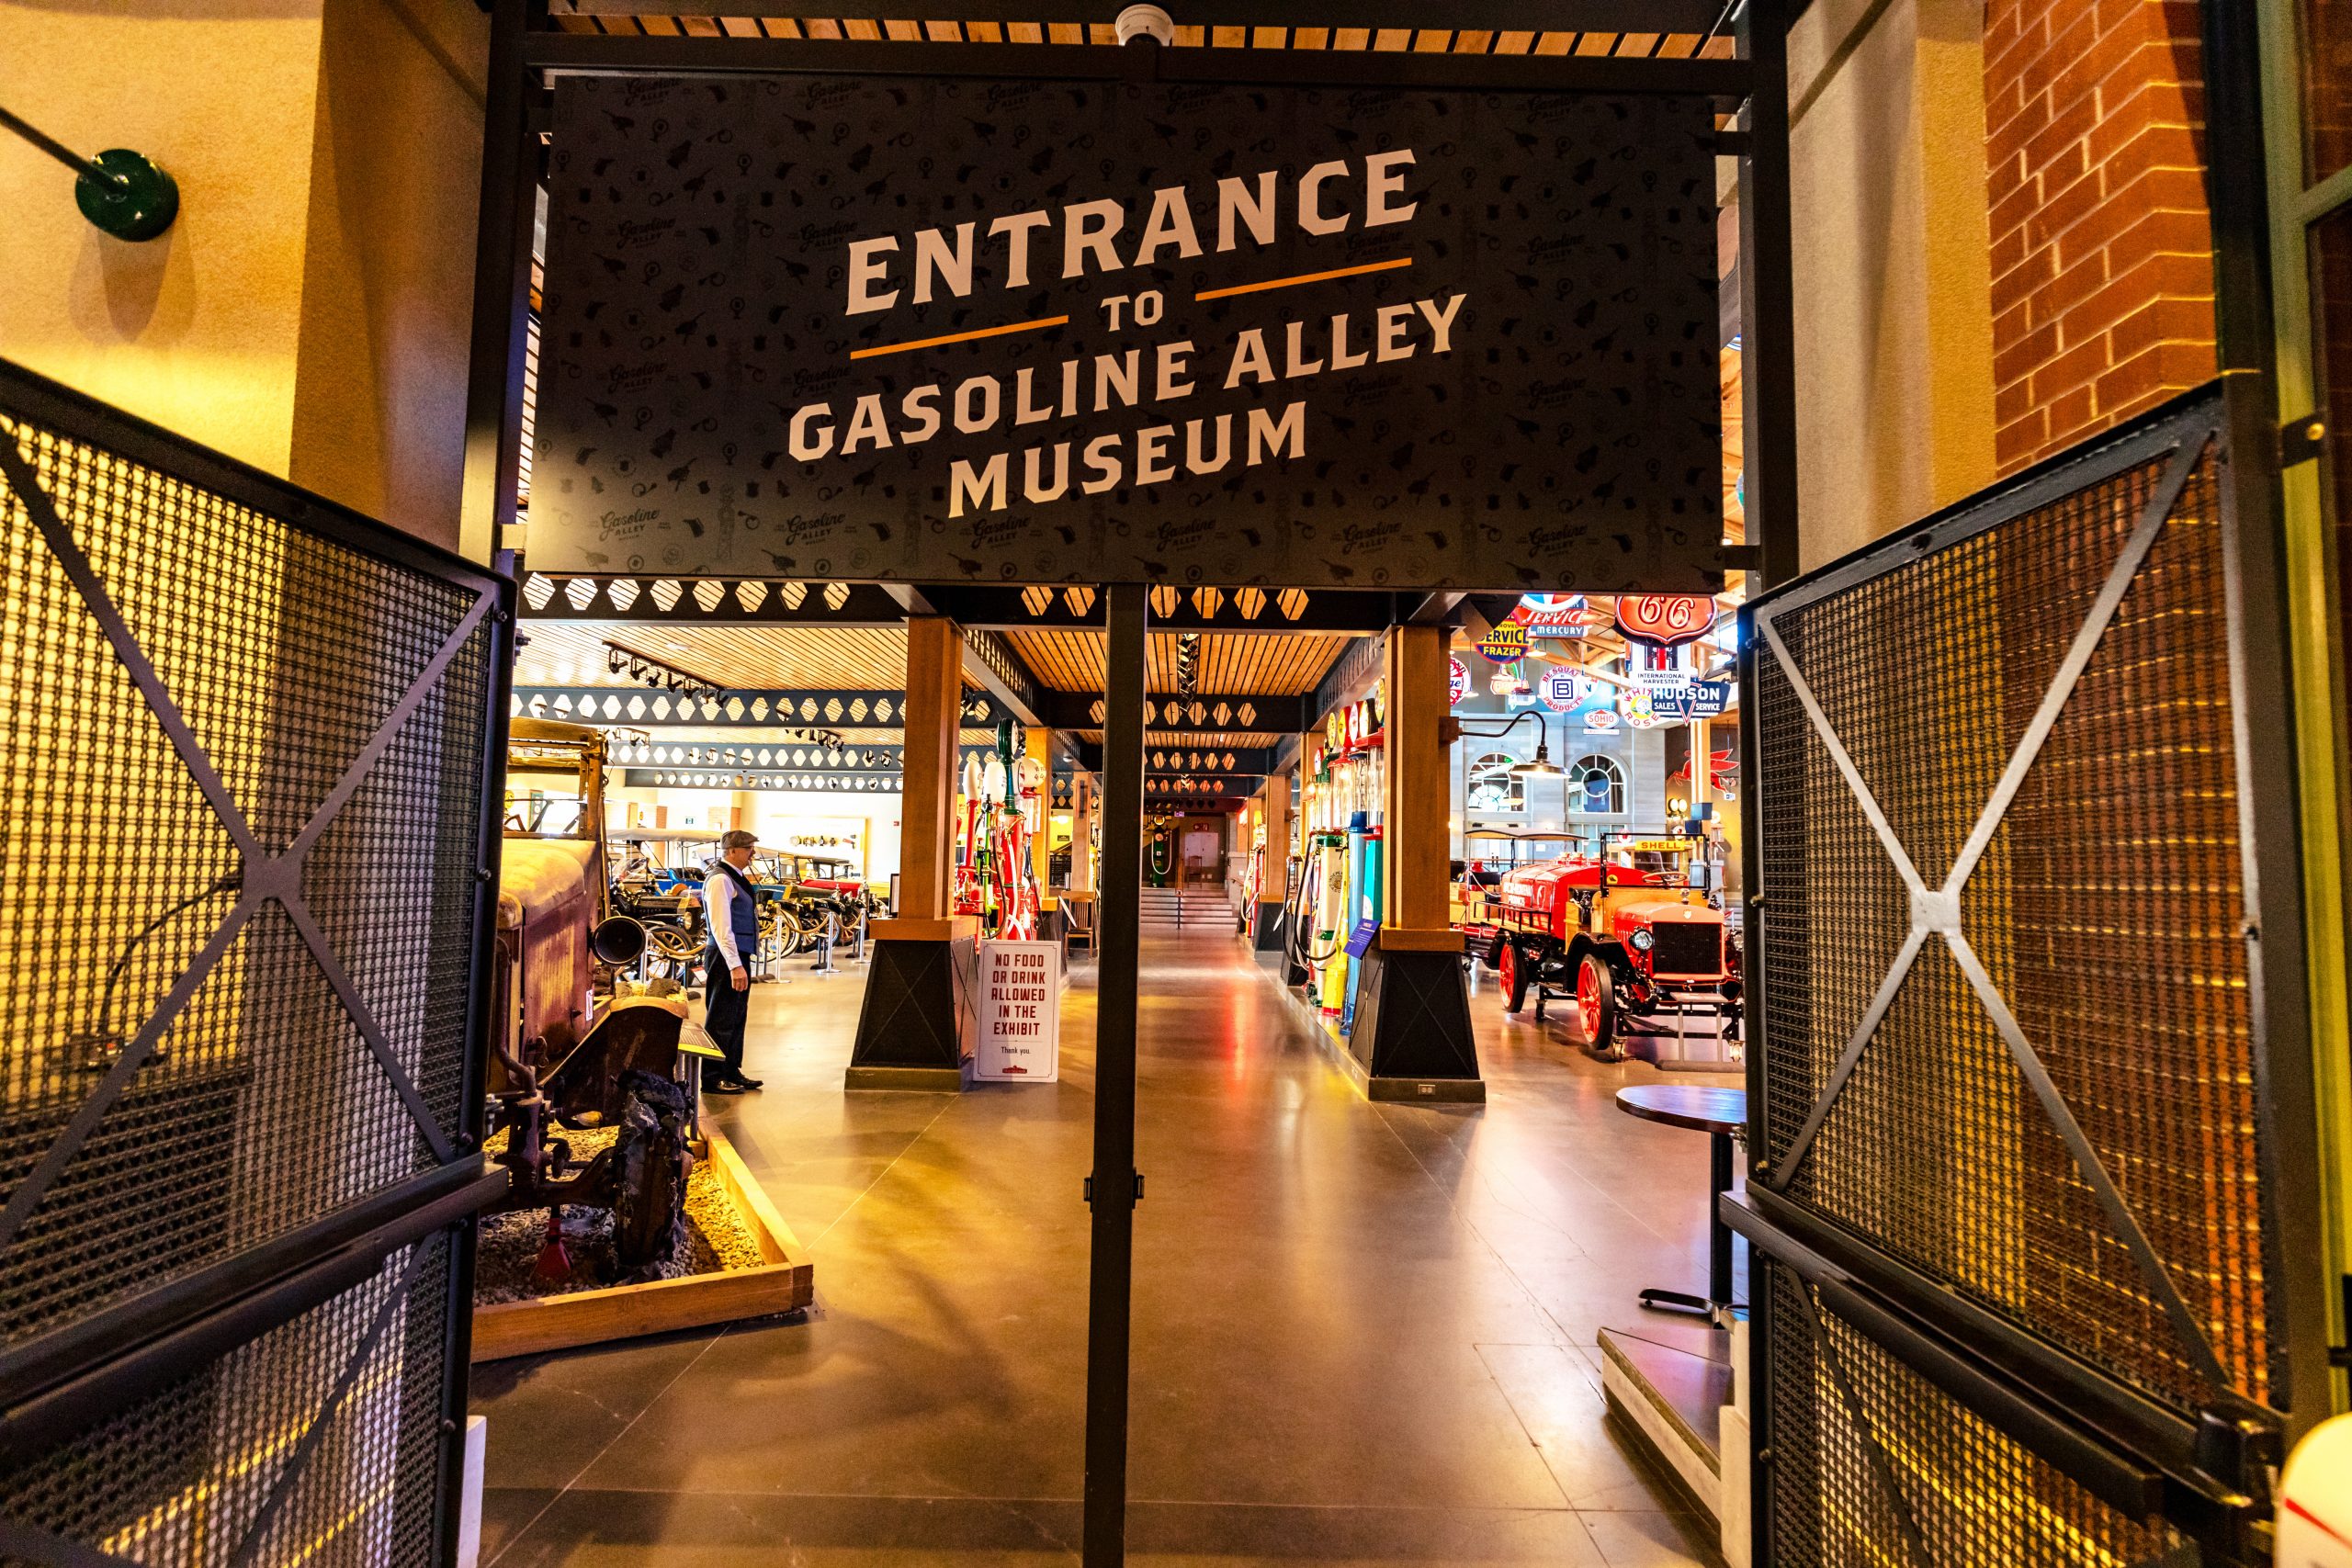 Gasoline Alley Museum at Heritage Park in Calgary